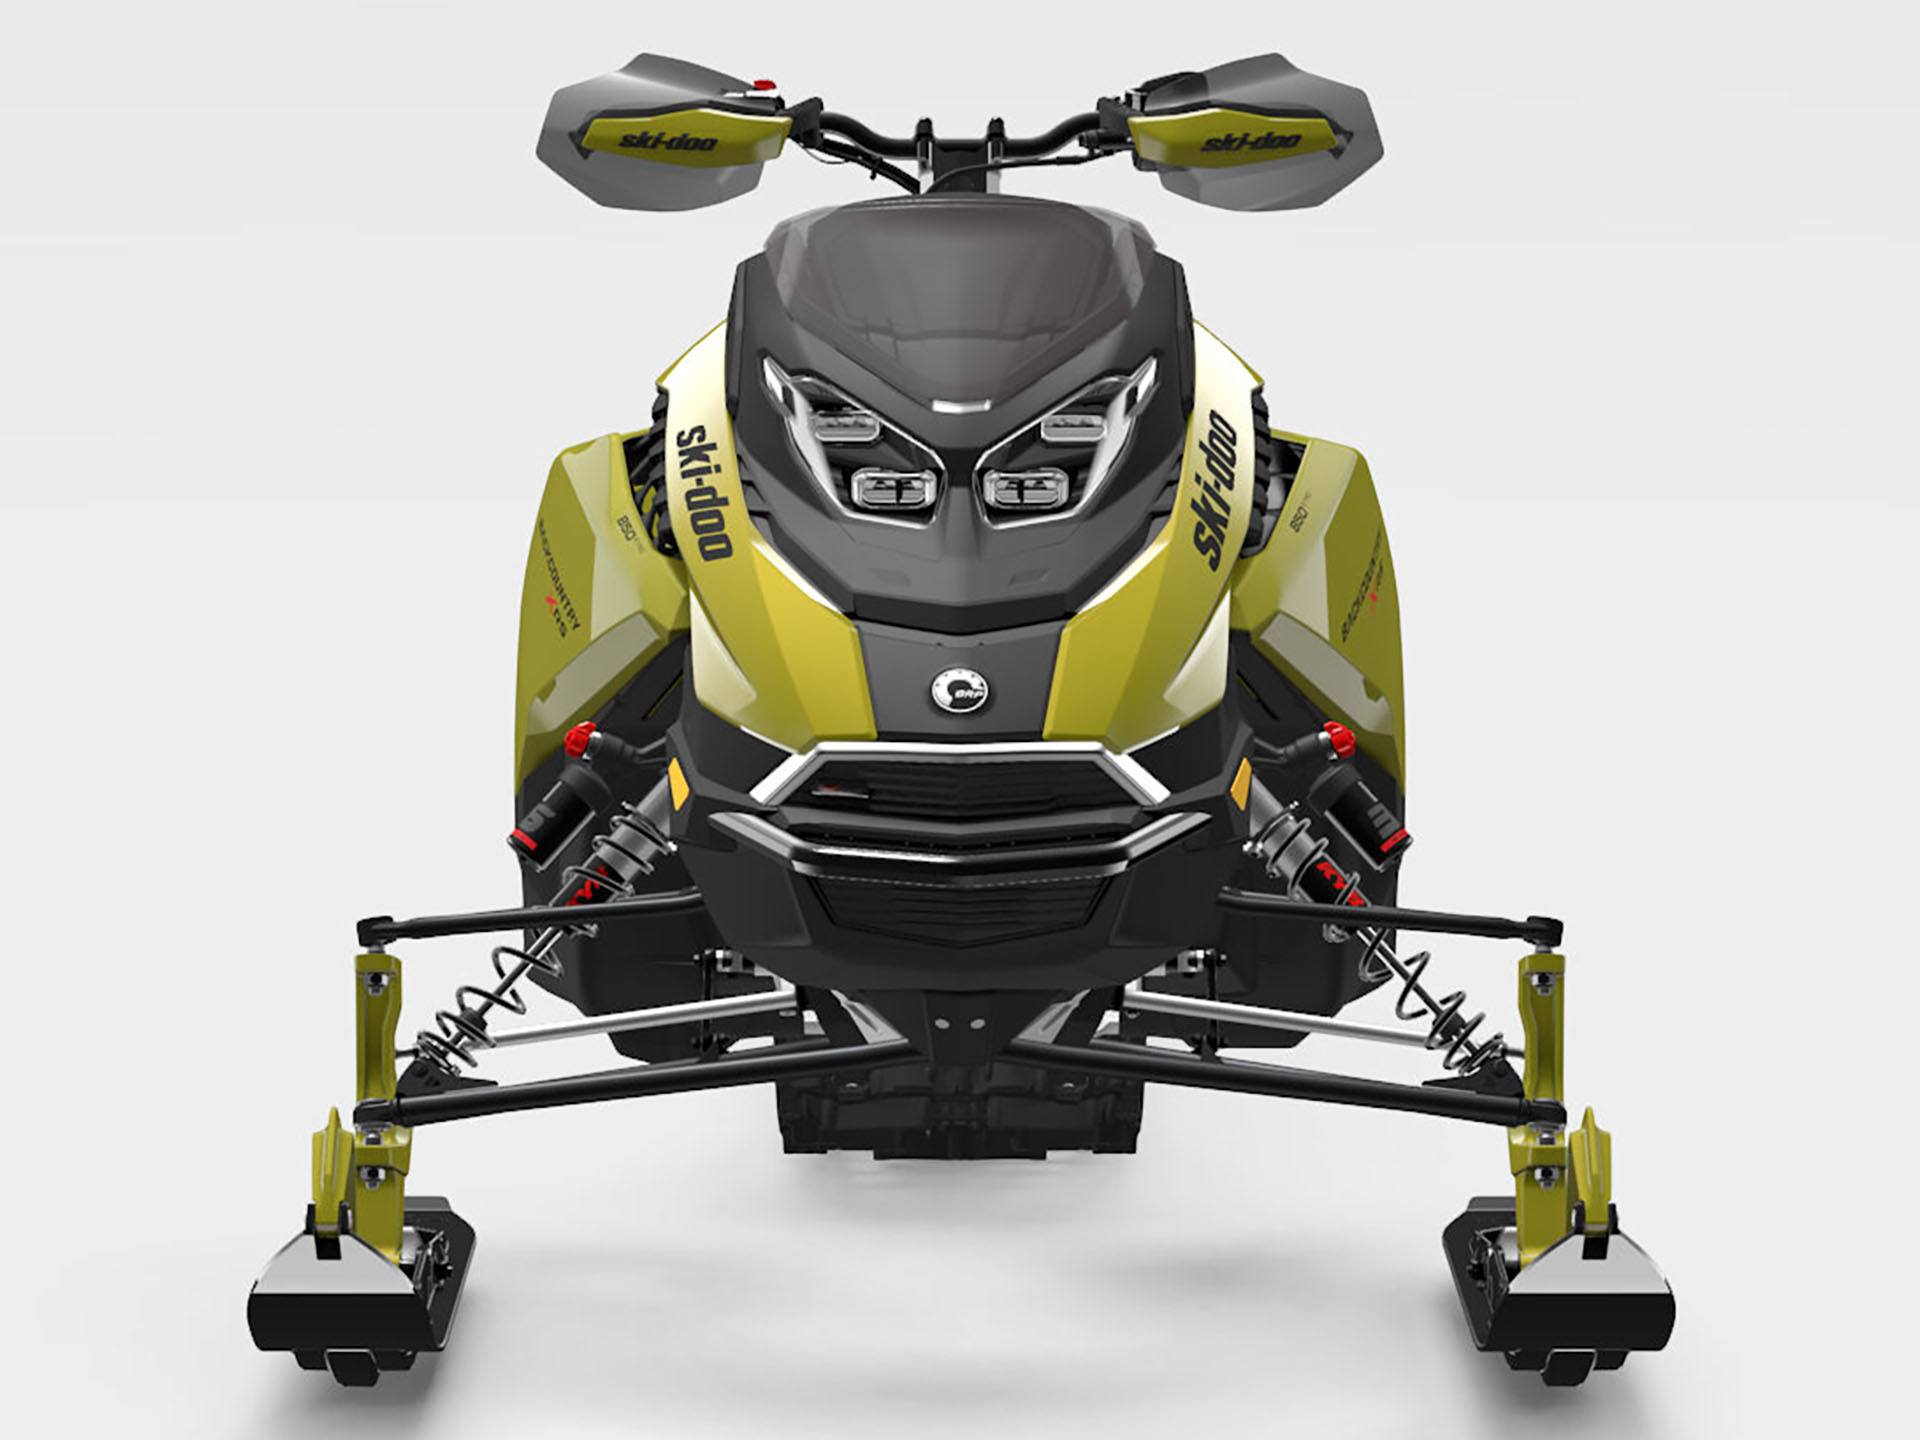 2025 Ski-Doo Backcountry X-RS 146 850 E-TEC ES Storm 150 1.5 Ski Stance 43 in. w/ 10.25 in. Touchscreen in Unity, Maine - Photo 4